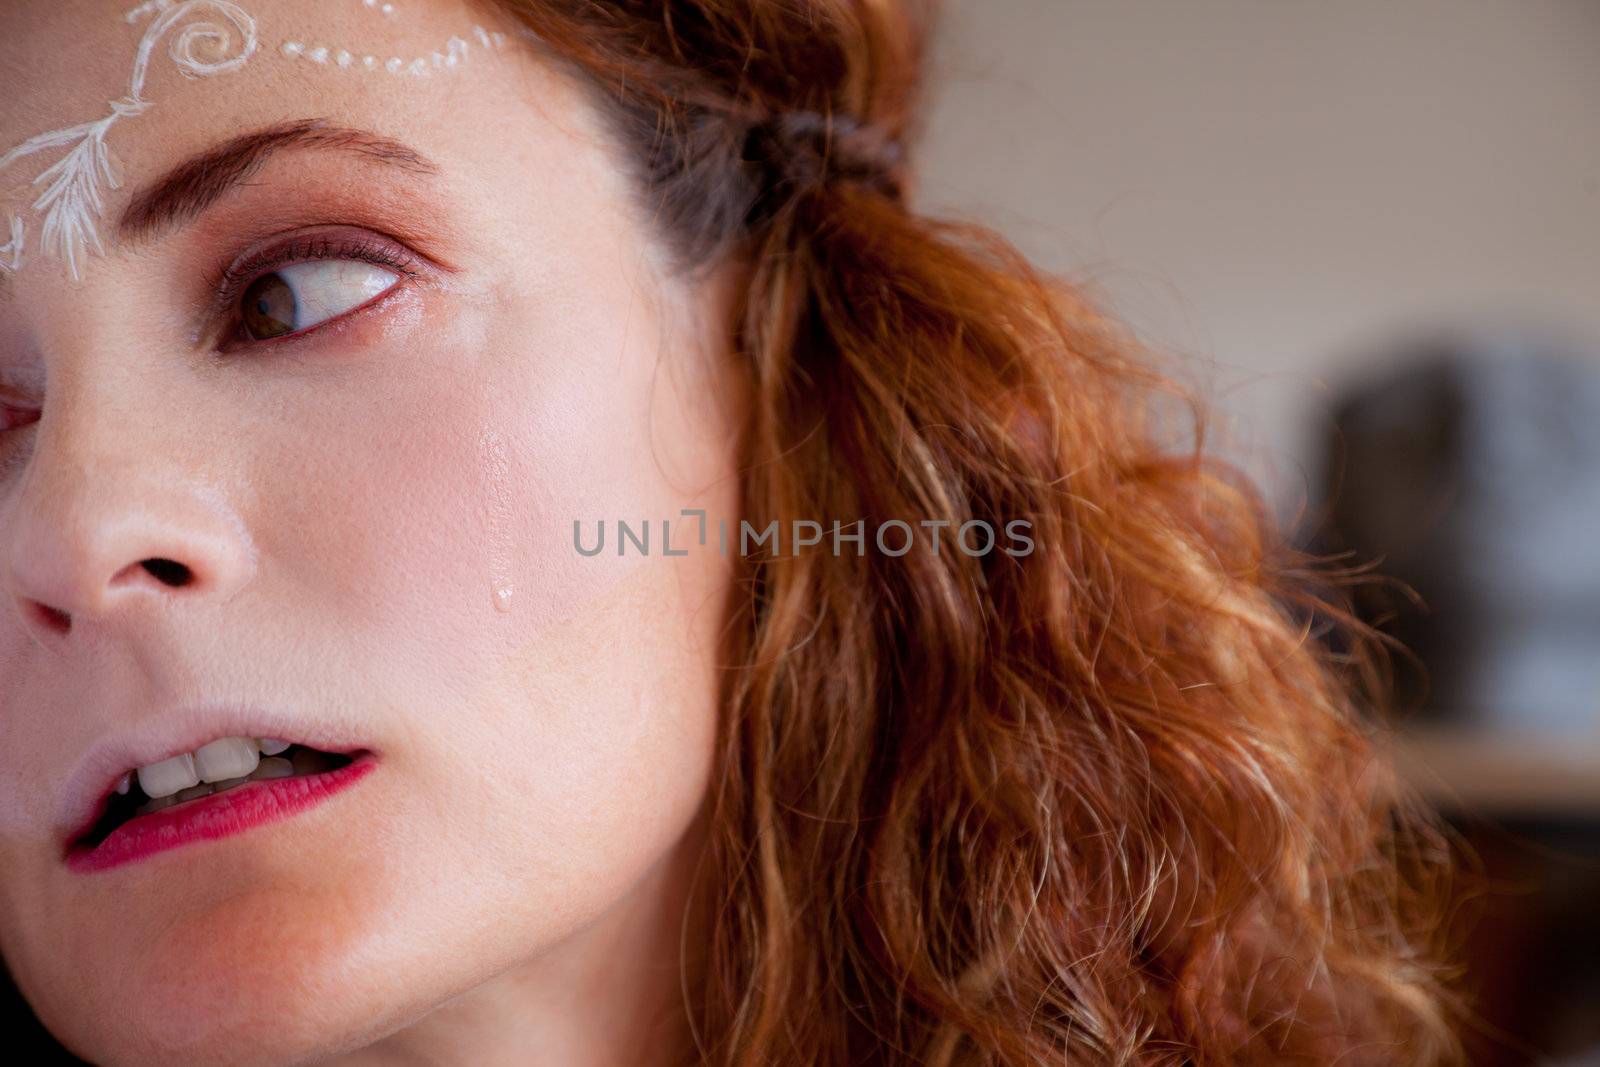 Portait of young sad woman crying with white henna tattoo on forehead, looking aside